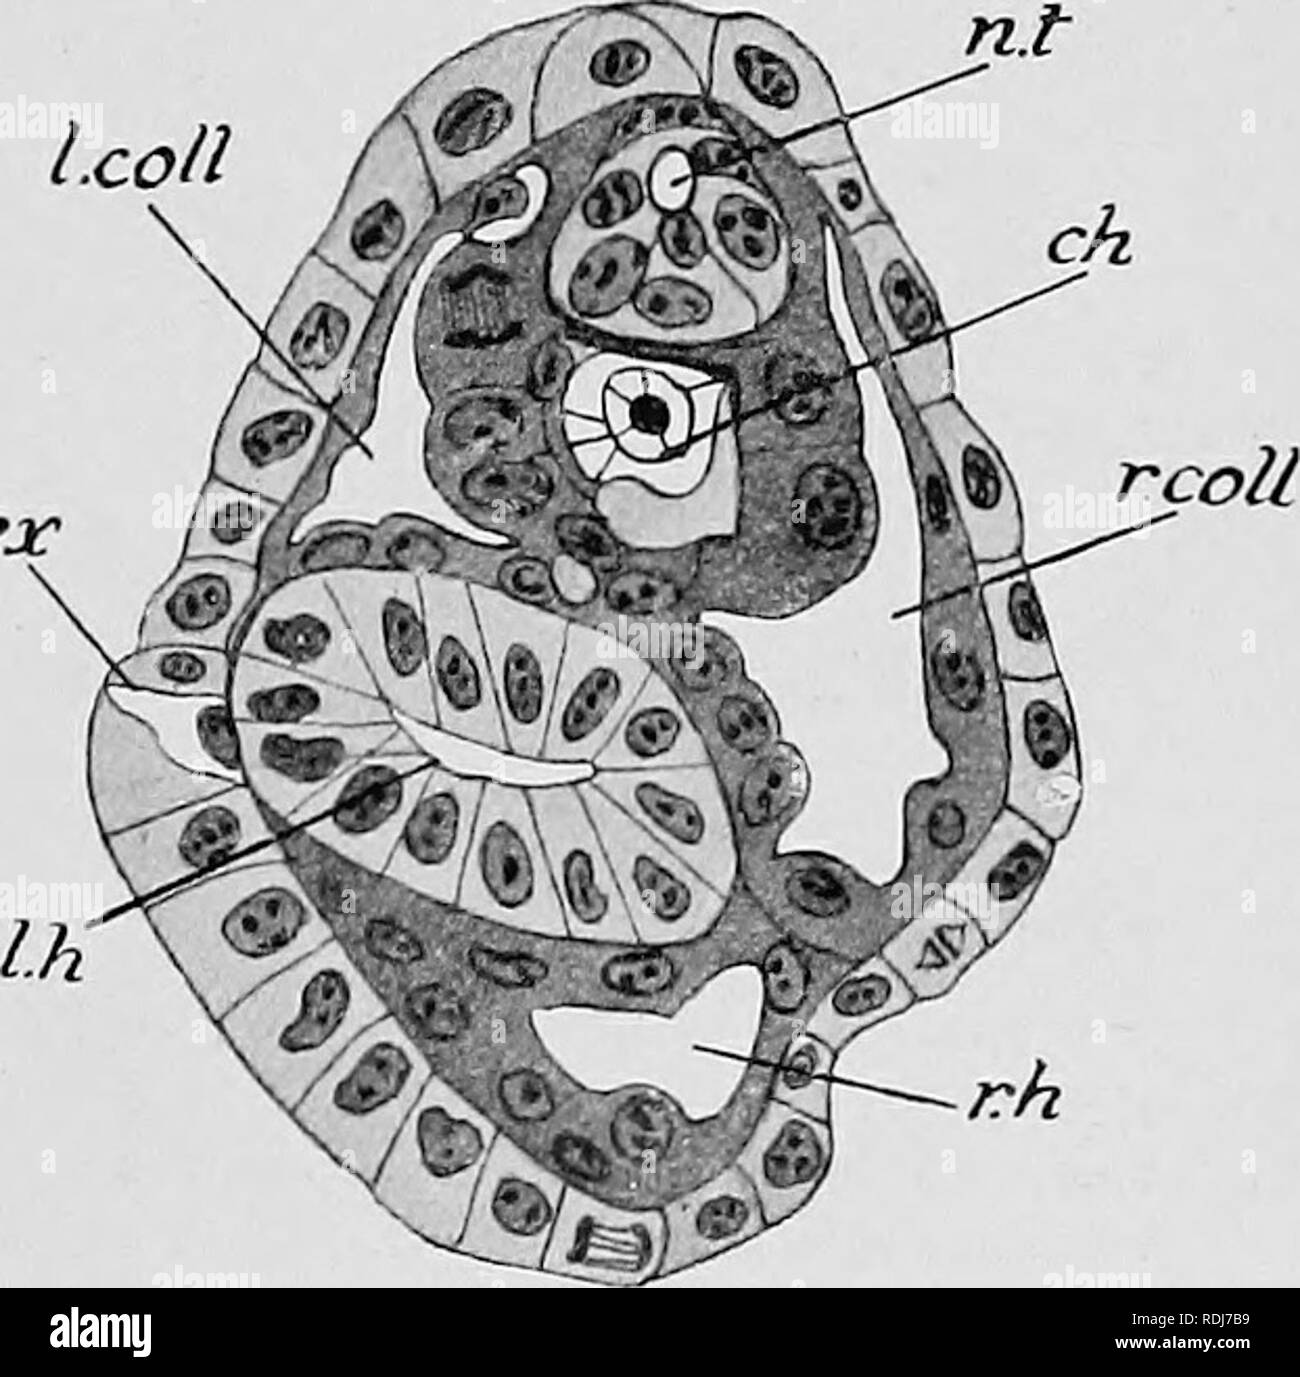 . Text-book of embryology. Embryology. 3^}. arch Fig. 433.—Illustrating the formation and development ol'the head-oavities of A viphioxus lanceolatus. A, transverse section through the anterior region of a larva with six myotomes—the liead-cavities are seen to be developing as outgrowths of the front end of the gut (archenteron). B, transverse section through the anterior region of a lar'a two days old just before the mouth opens—the left head-cavity is a thick-walled vesicle ; the right head-cavity is a thin-walled vesicle and lies beneath the left one. arcli, archenteron (gut) ; ch, notocho Stock Photo